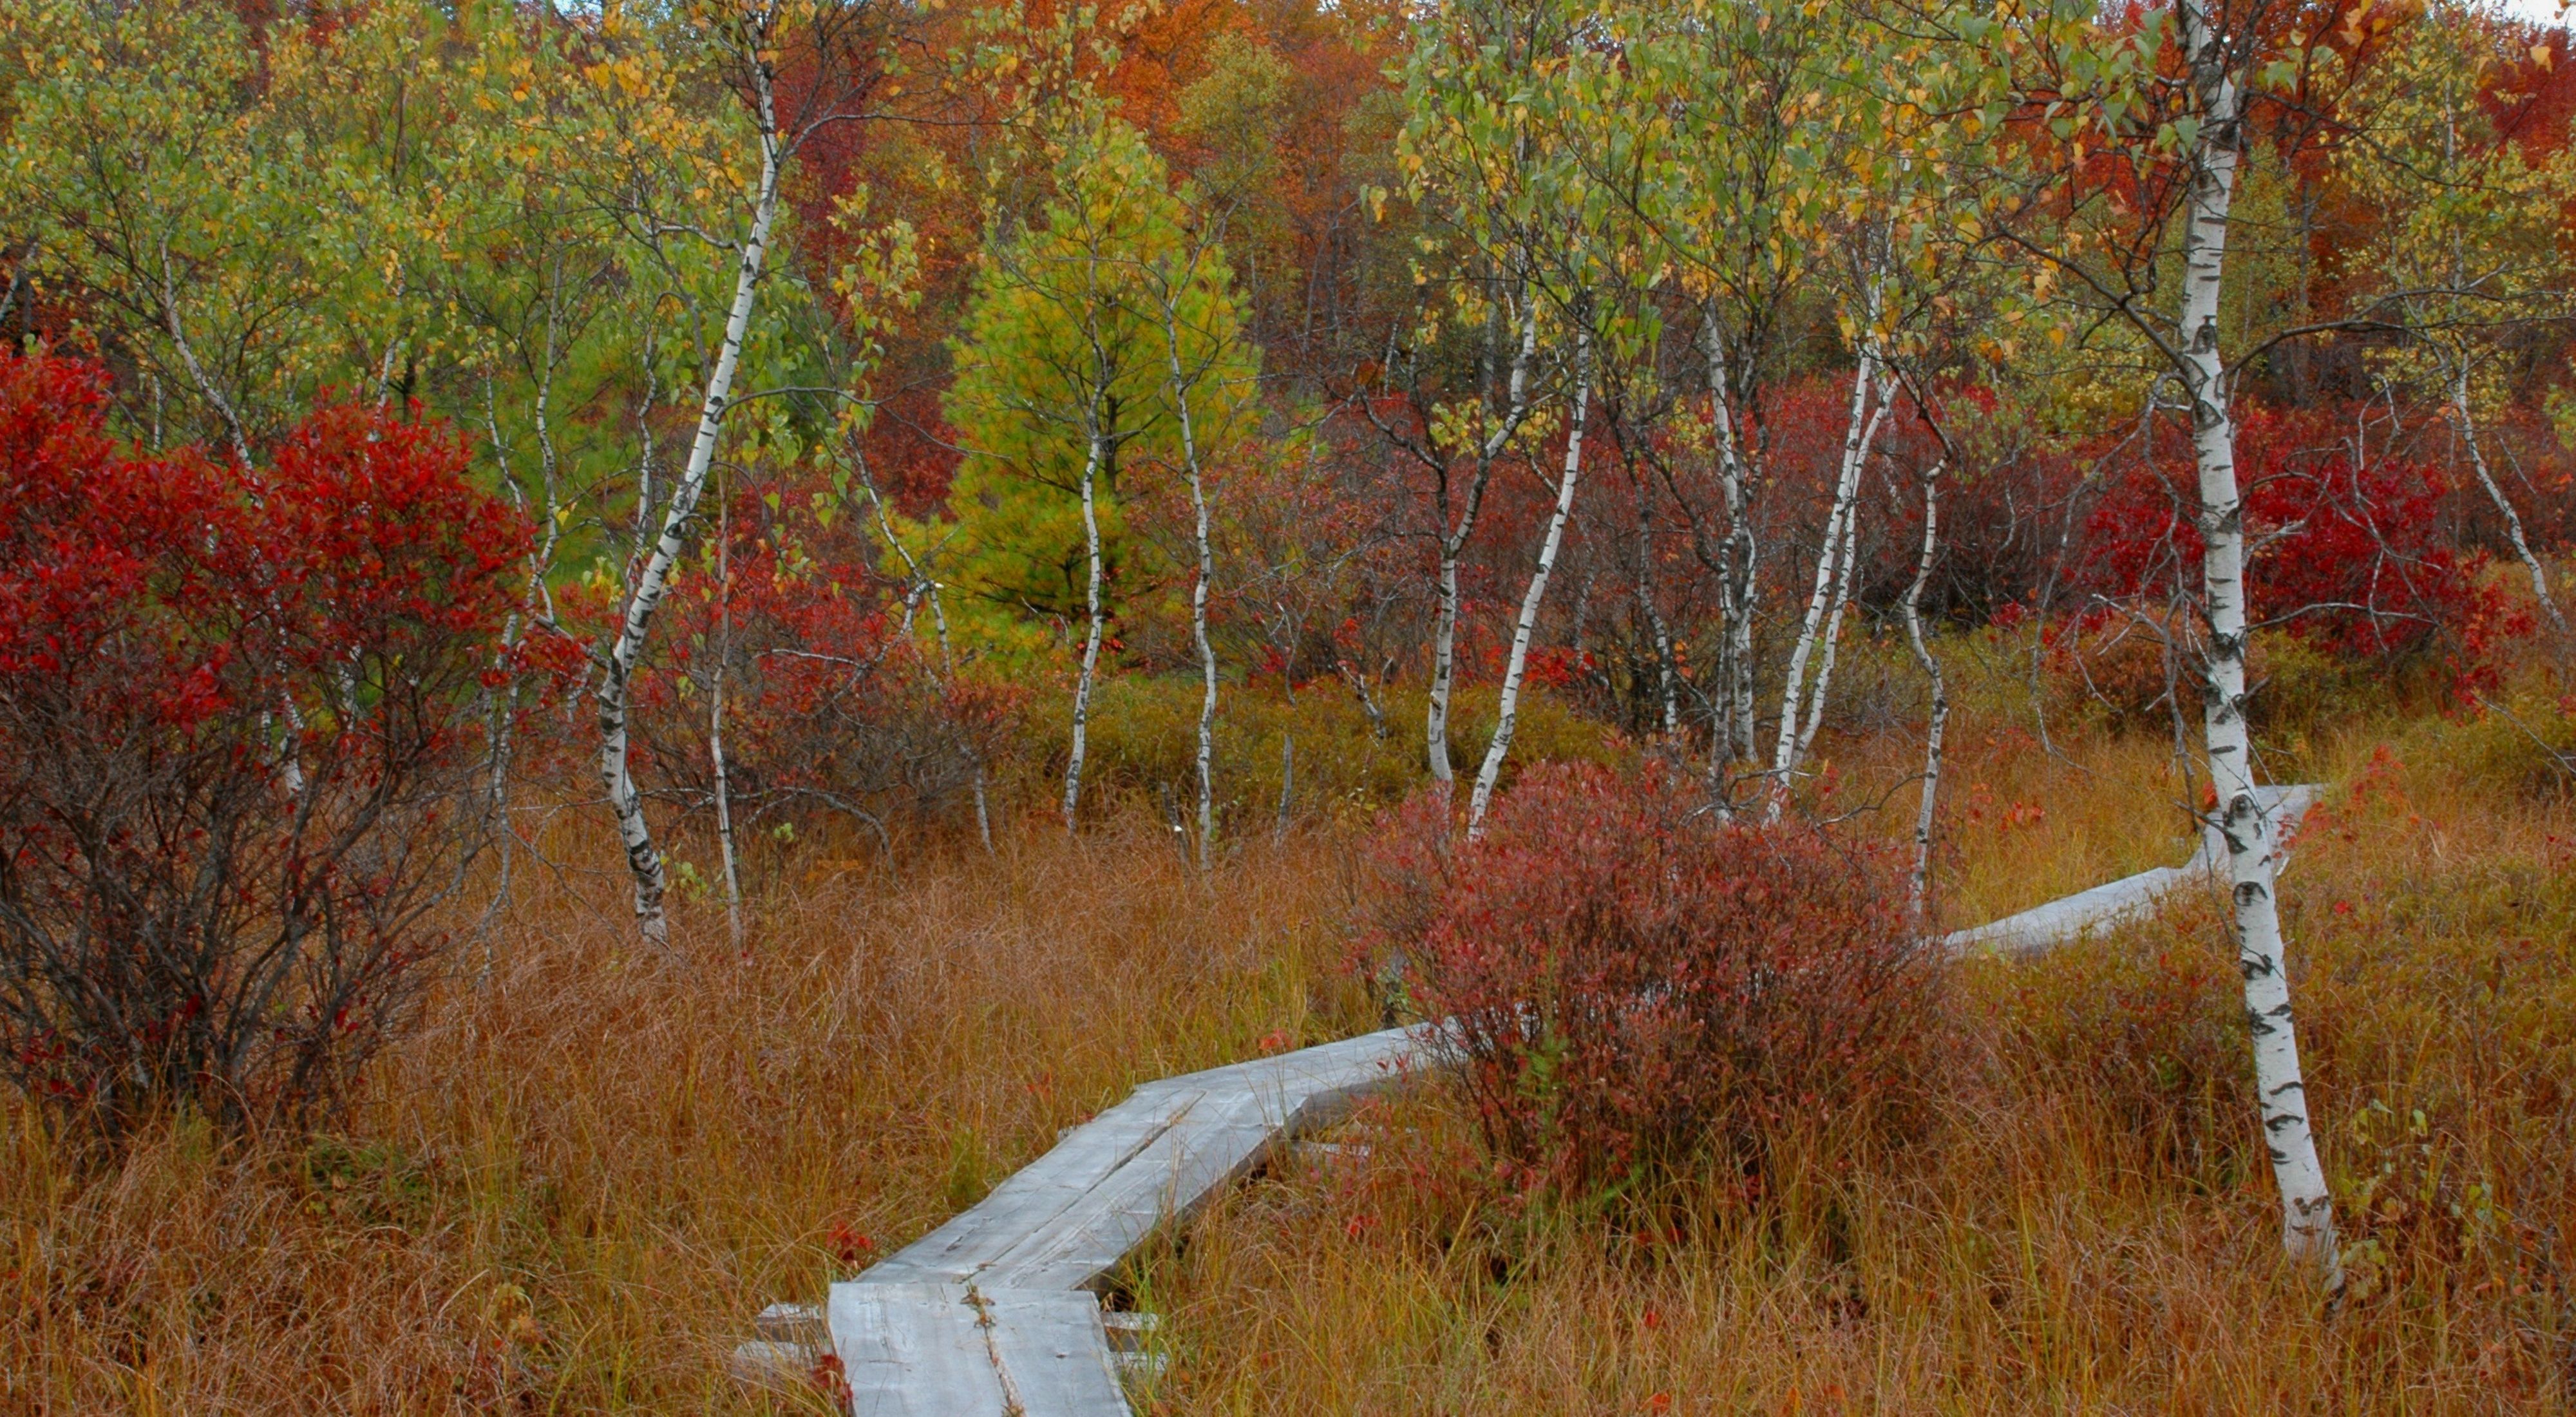 A thin wooden boardwalk curves through a meadow with tall brown grasses and fall colored red, orange, yellow, and light green shrubs and thin trees.